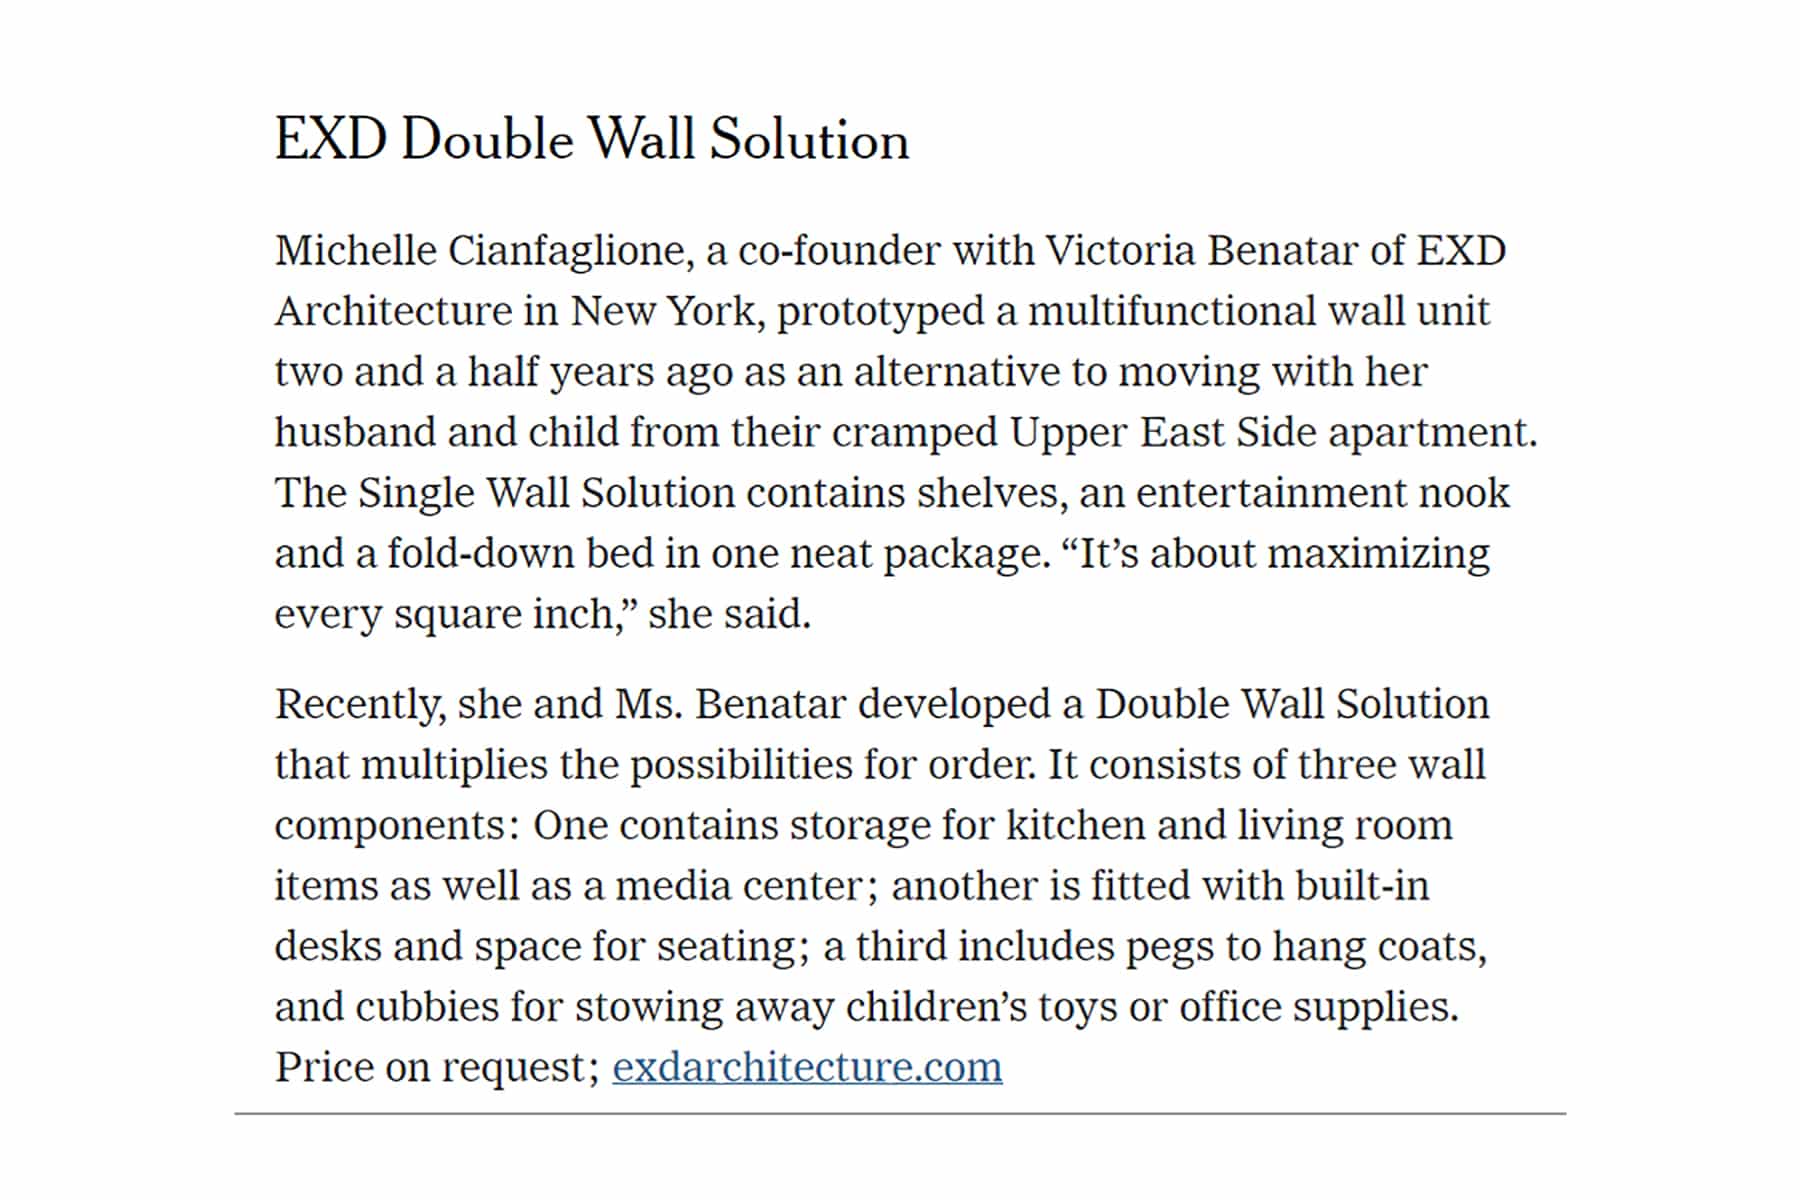 New York Times featured EXD Architecture's Double wall design solution